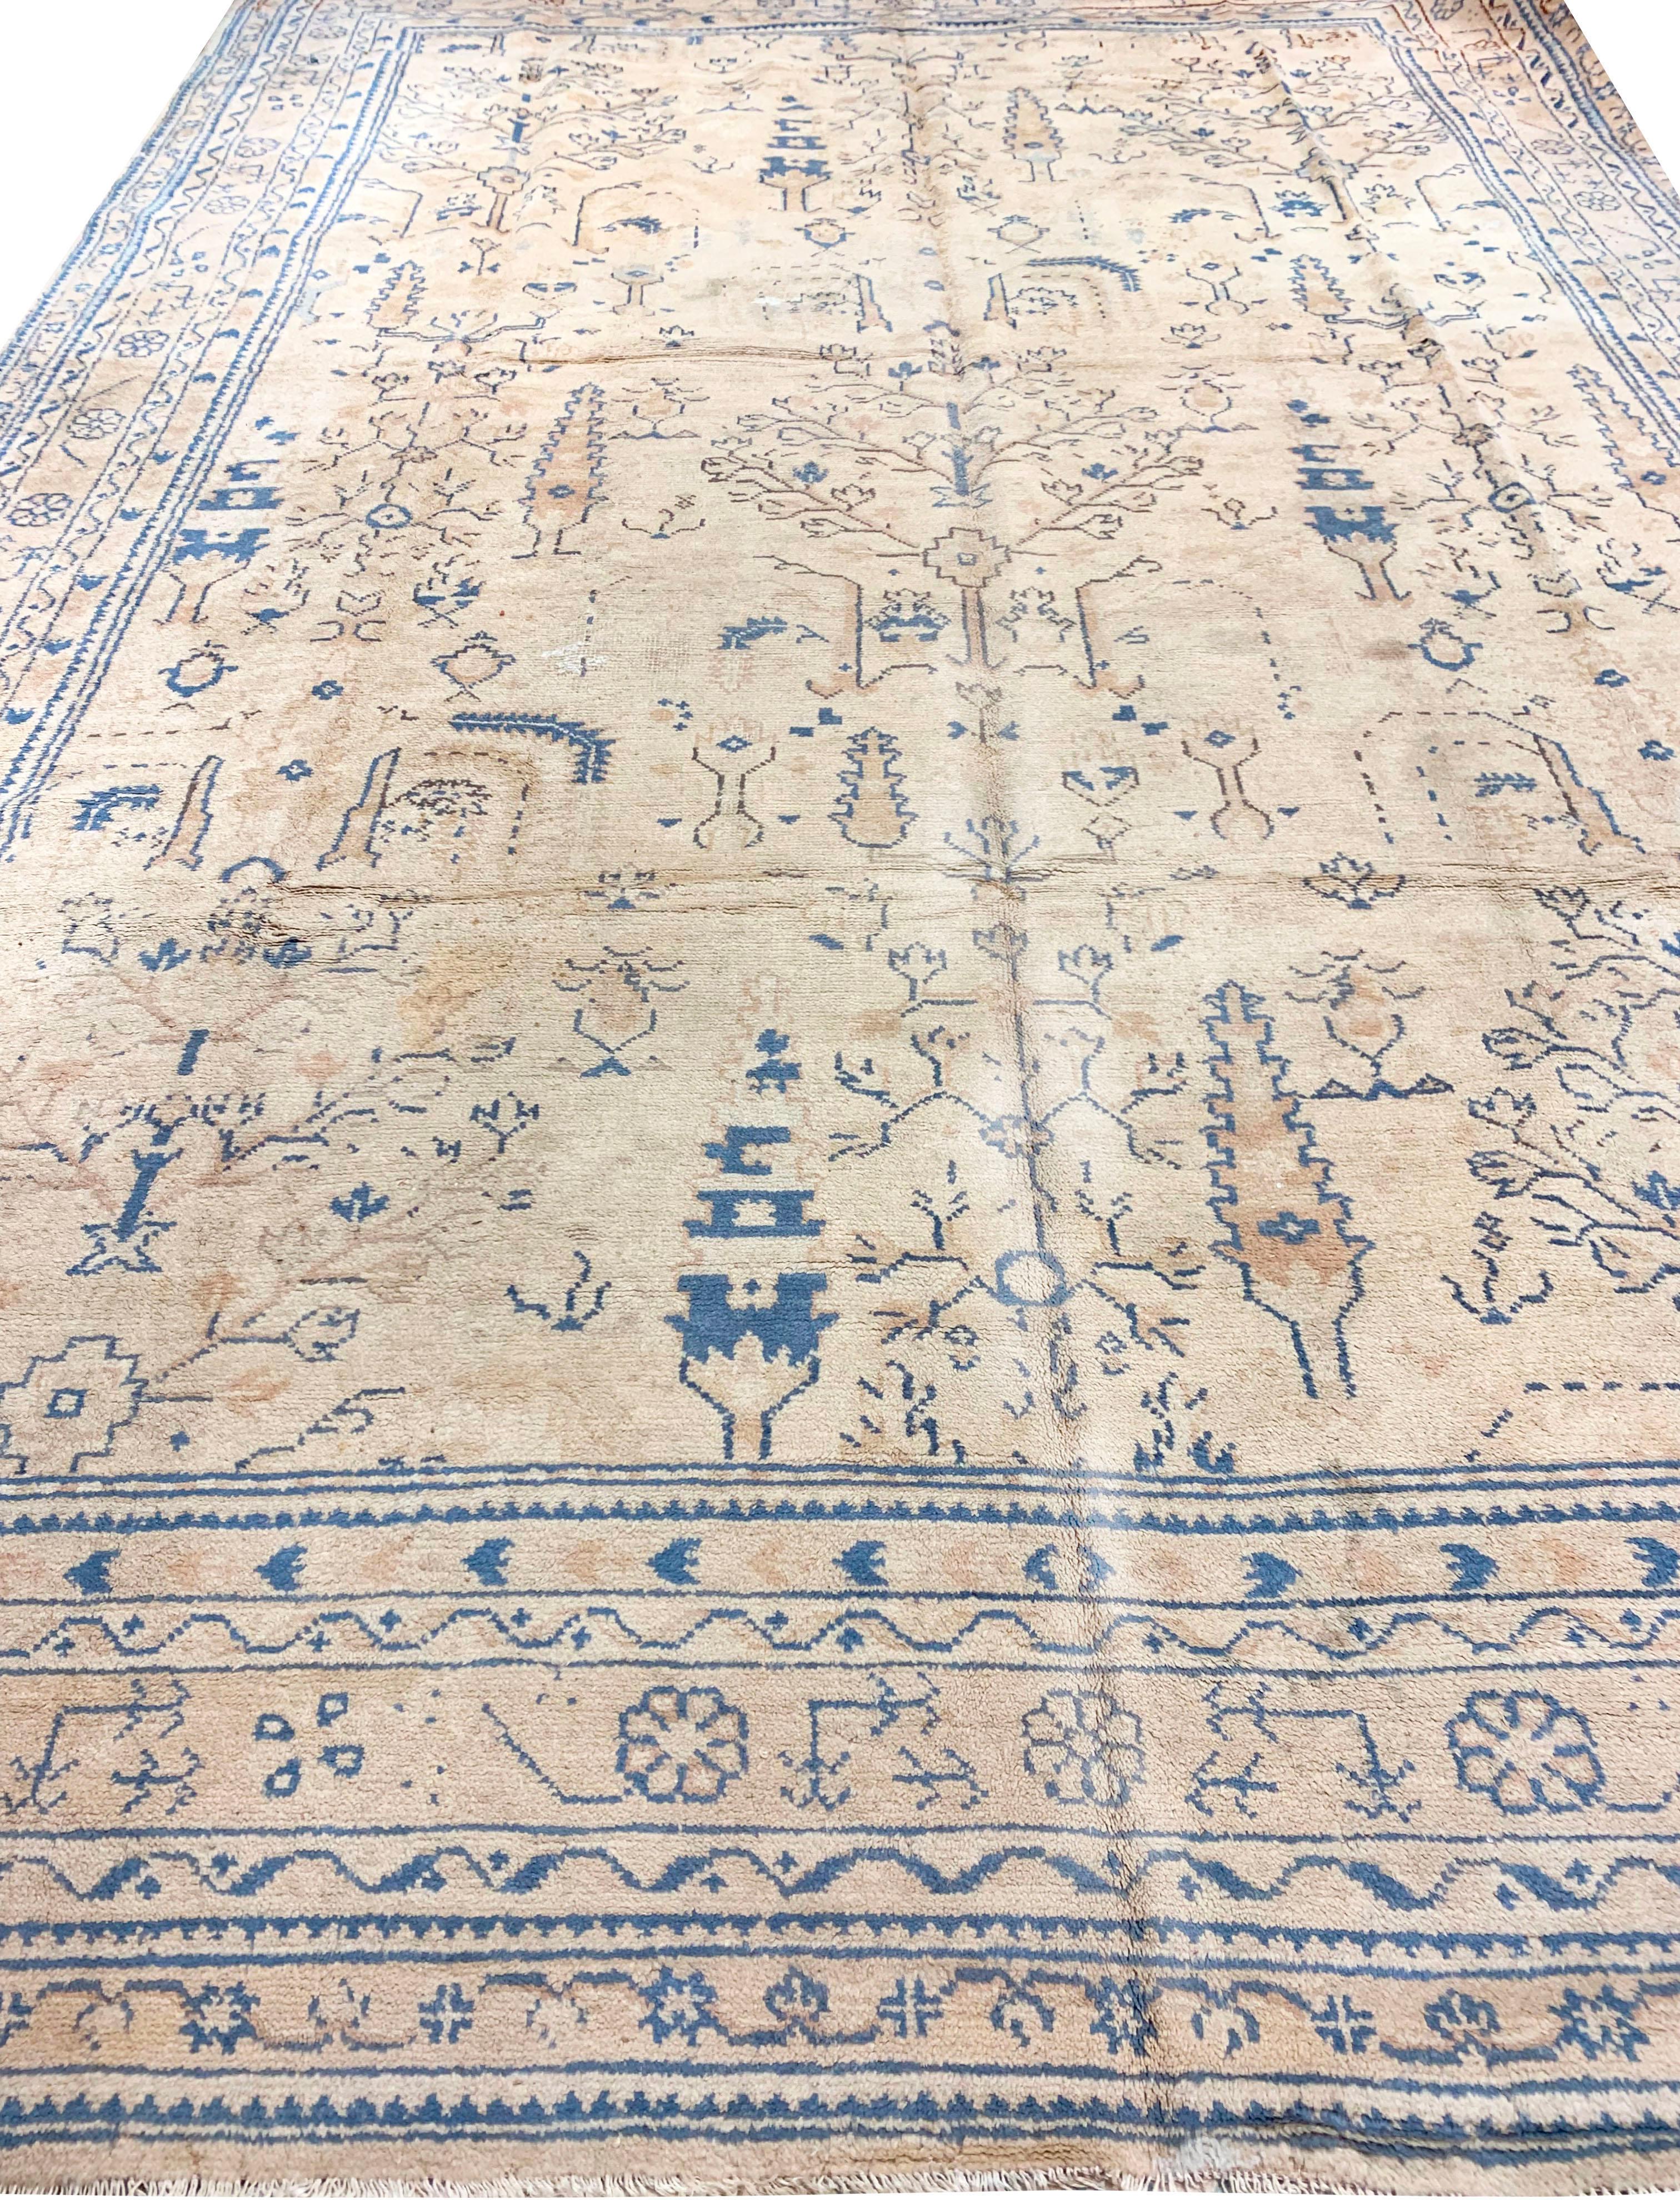 Vintage Turkish Oushak Carpet  9'8 x 14'10 In Good Condition For Sale In New York, NY